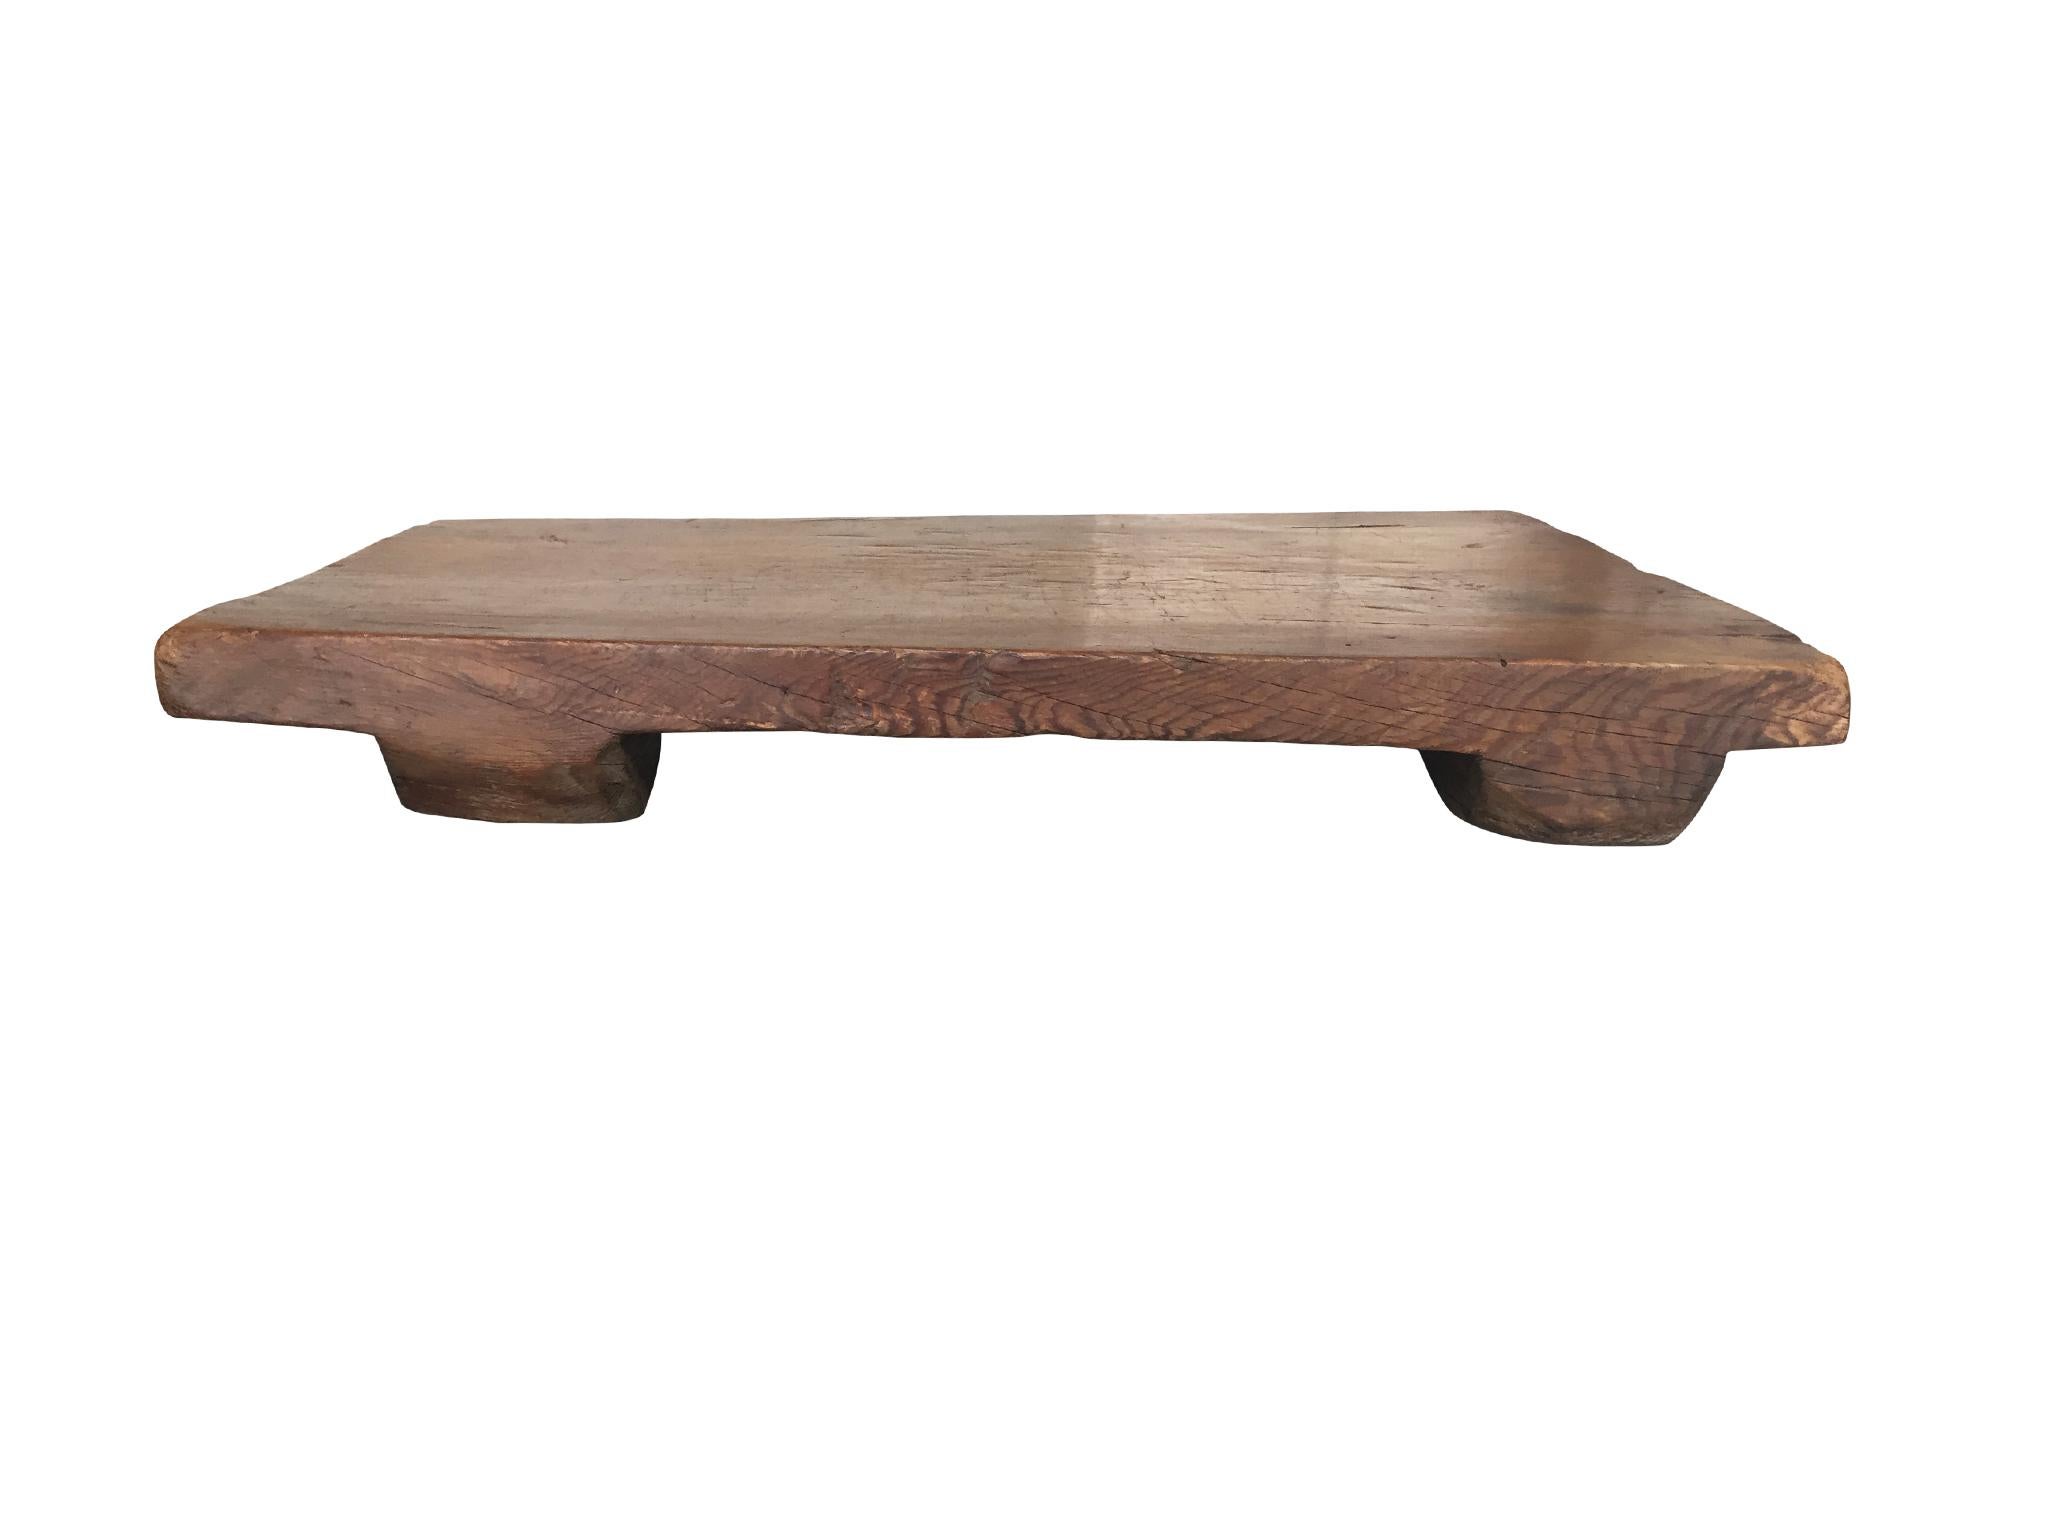 A contemporary low plinth table in the spirit of Axel Vervoordt. The style is very simple and keeps to the raw material quality of elmwood, which has a warm red-brown tone. What makes this table special is its organic shape and surface. A beautiful